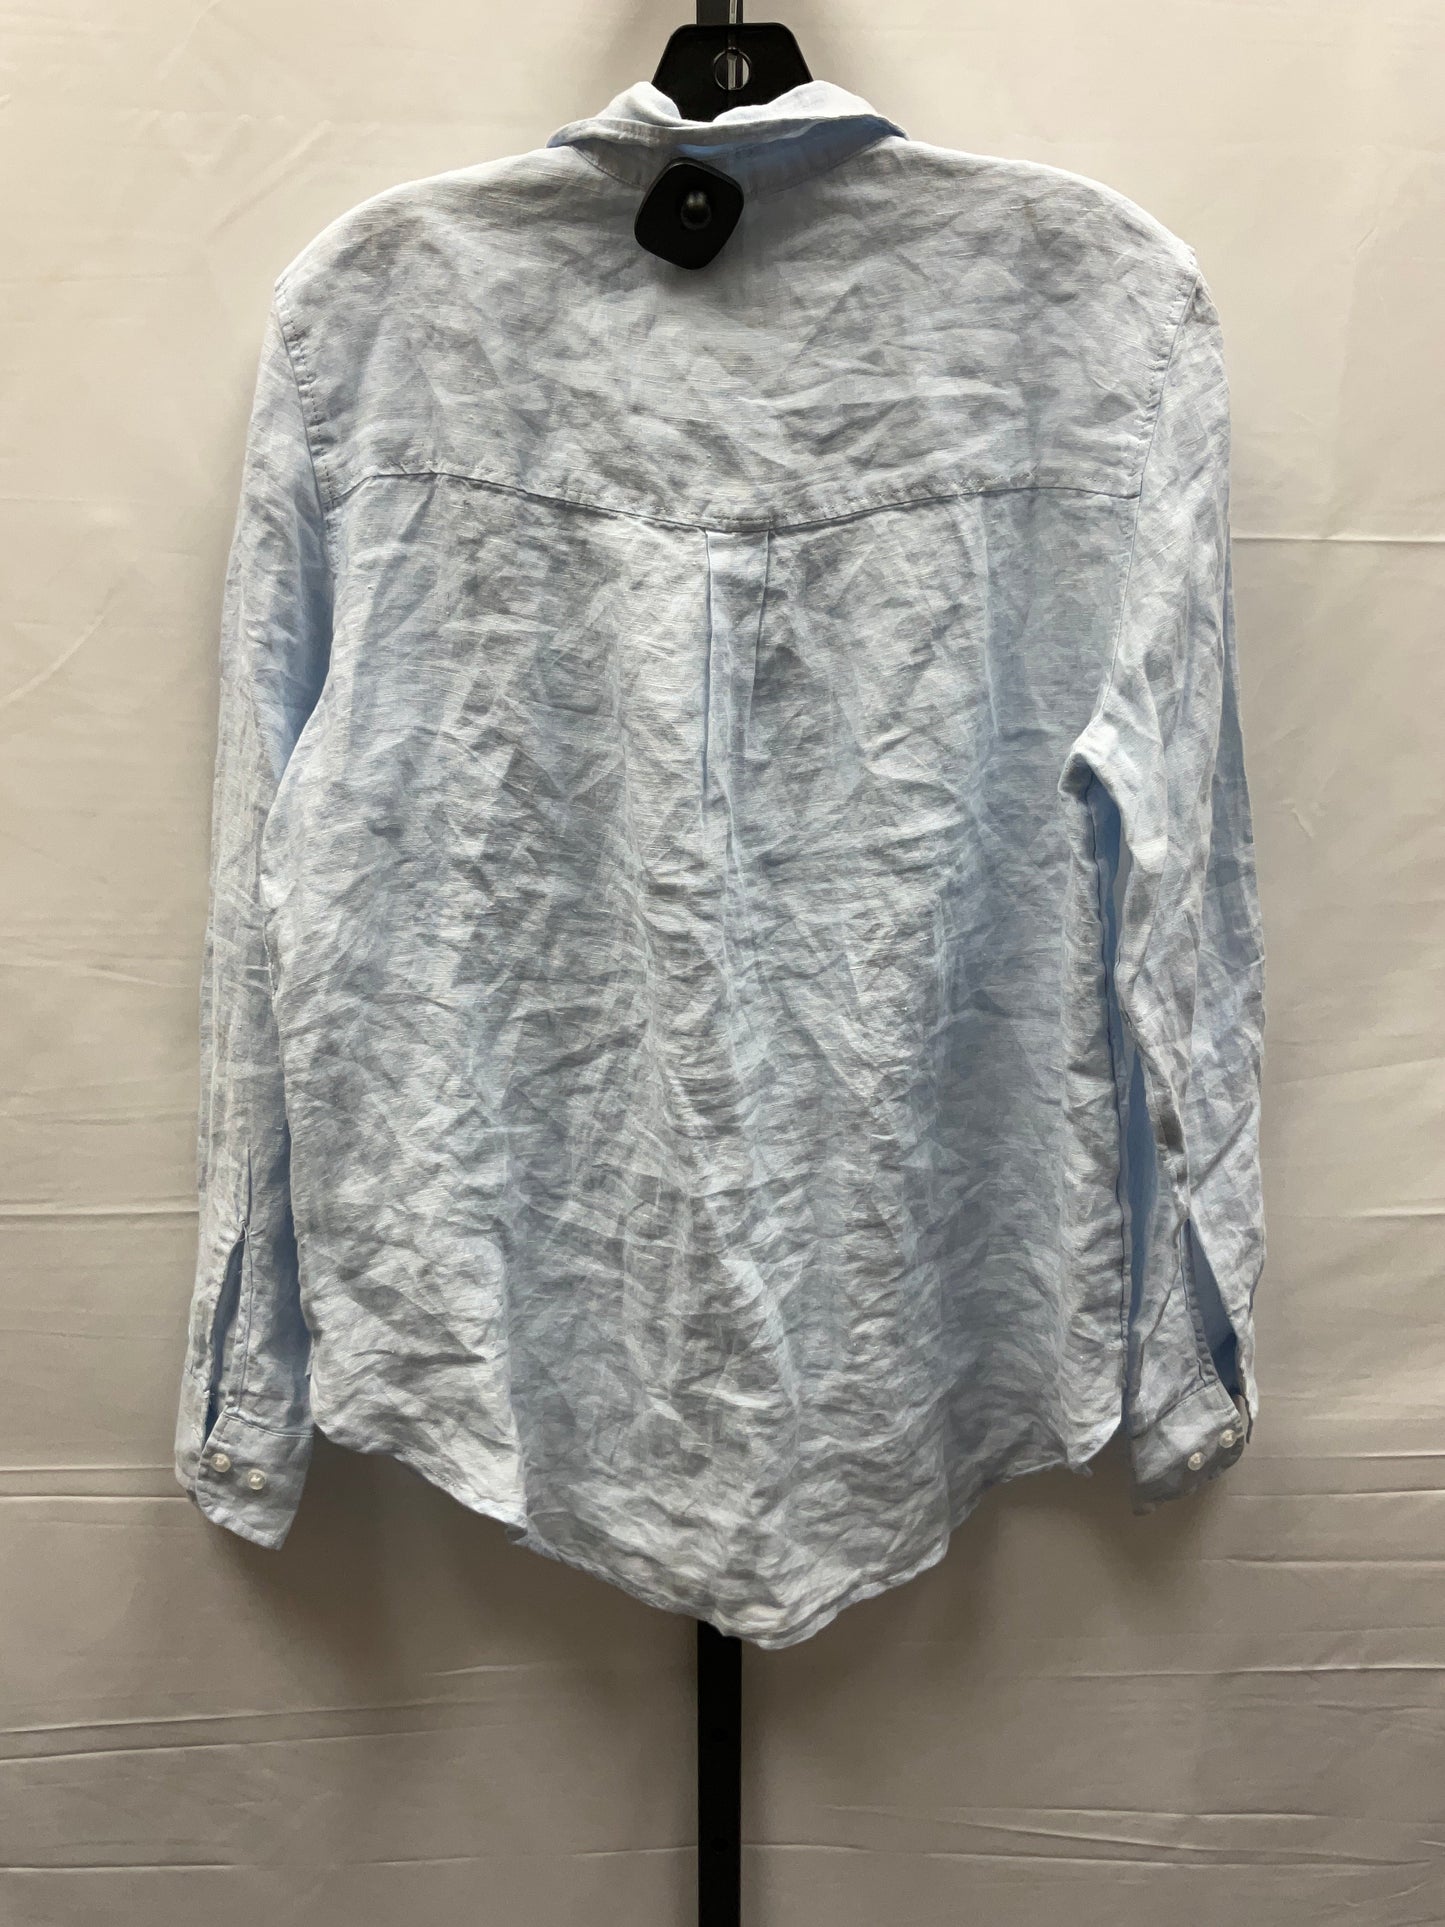 Blue Top Long Sleeve H&m, Size M